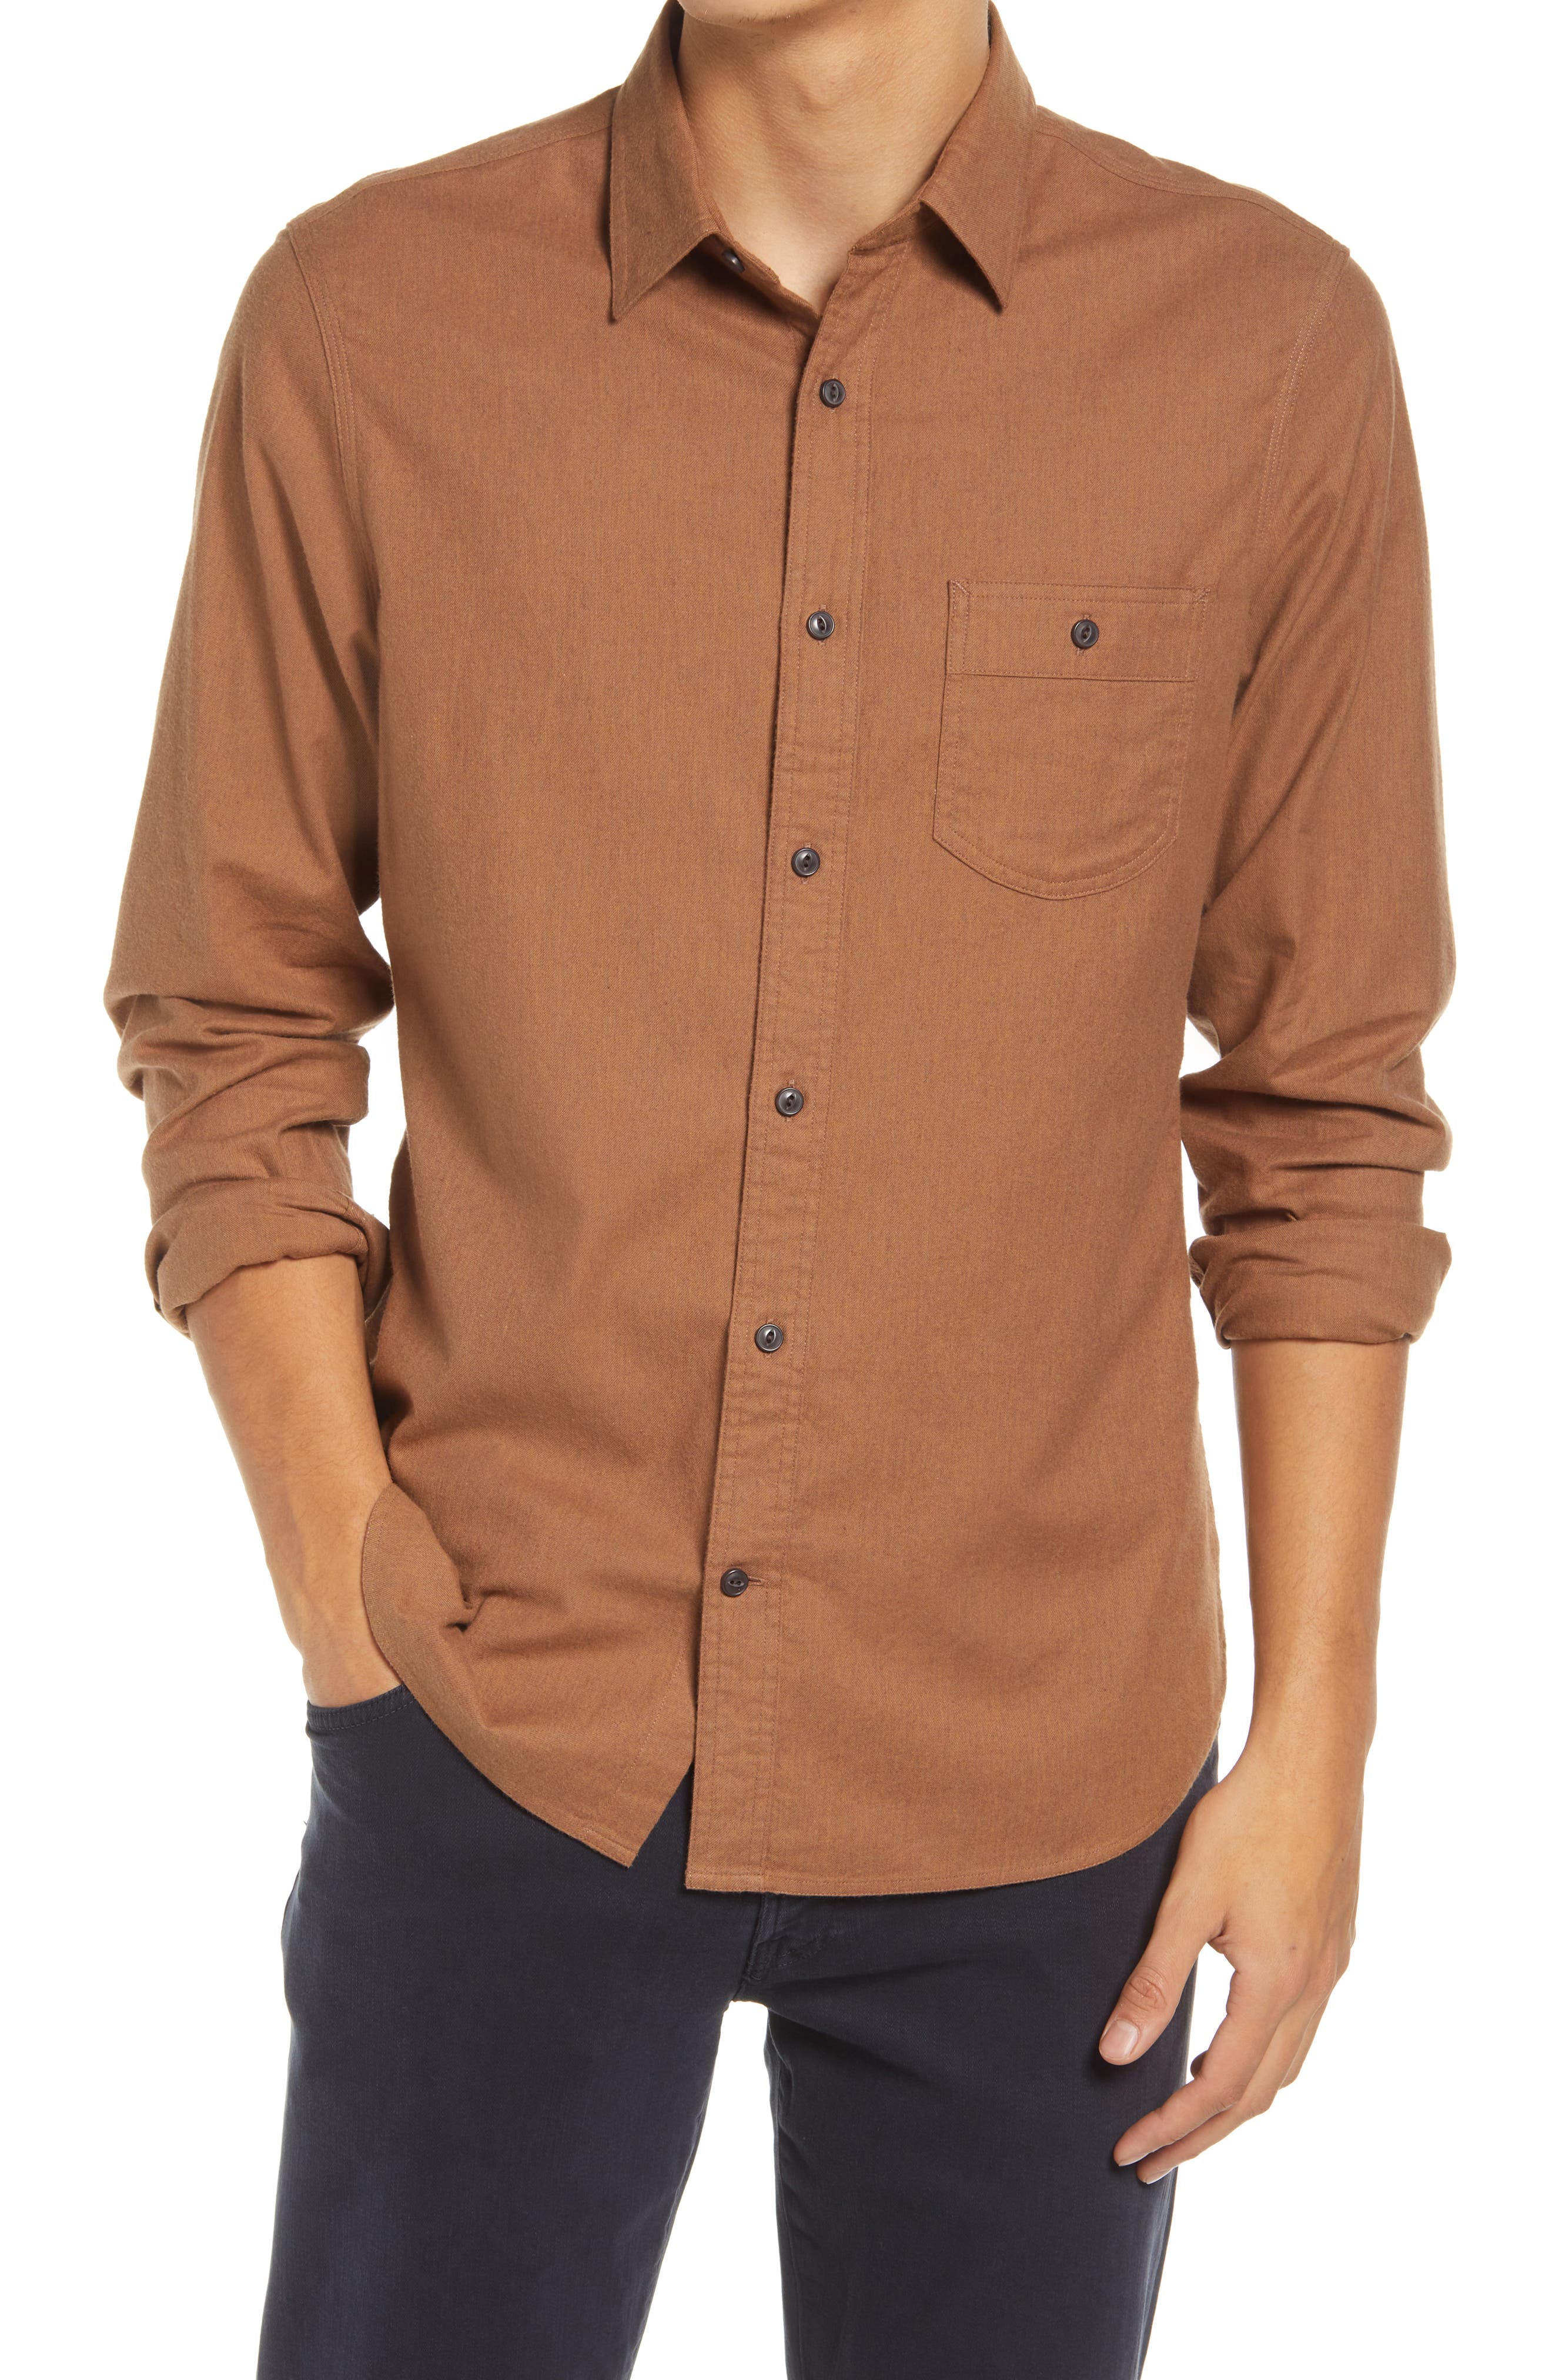 Men's Brown Button Up Shirts | Nordstrom